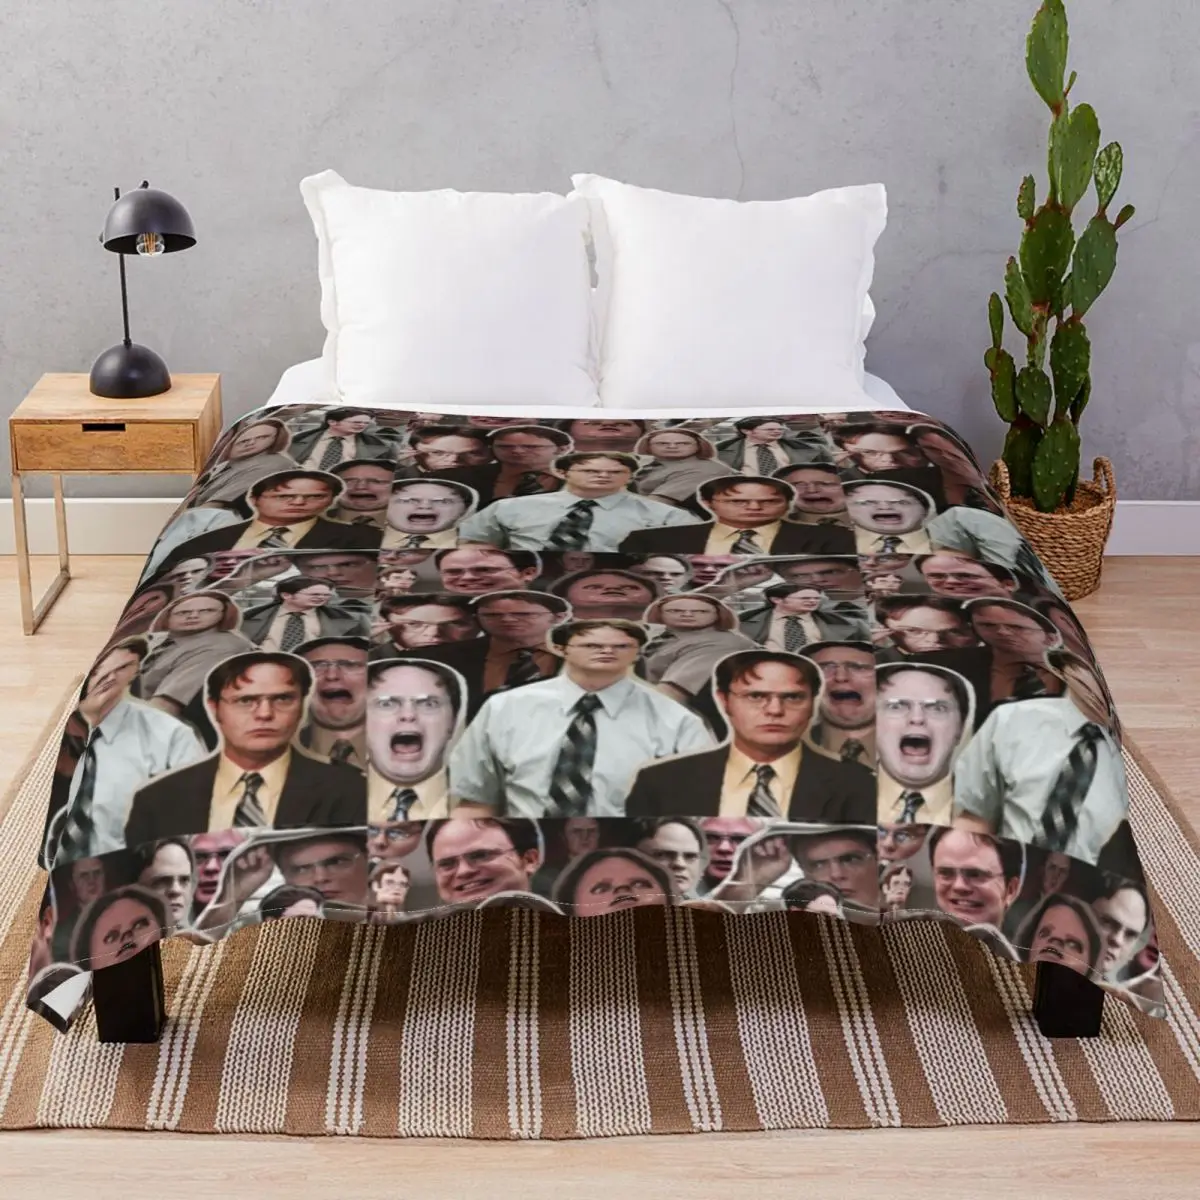 Dwight Schrute The Office Blankets Fleece Summer Fluffy Unisex Throw Blanket for Bed Home Couch Camp Office